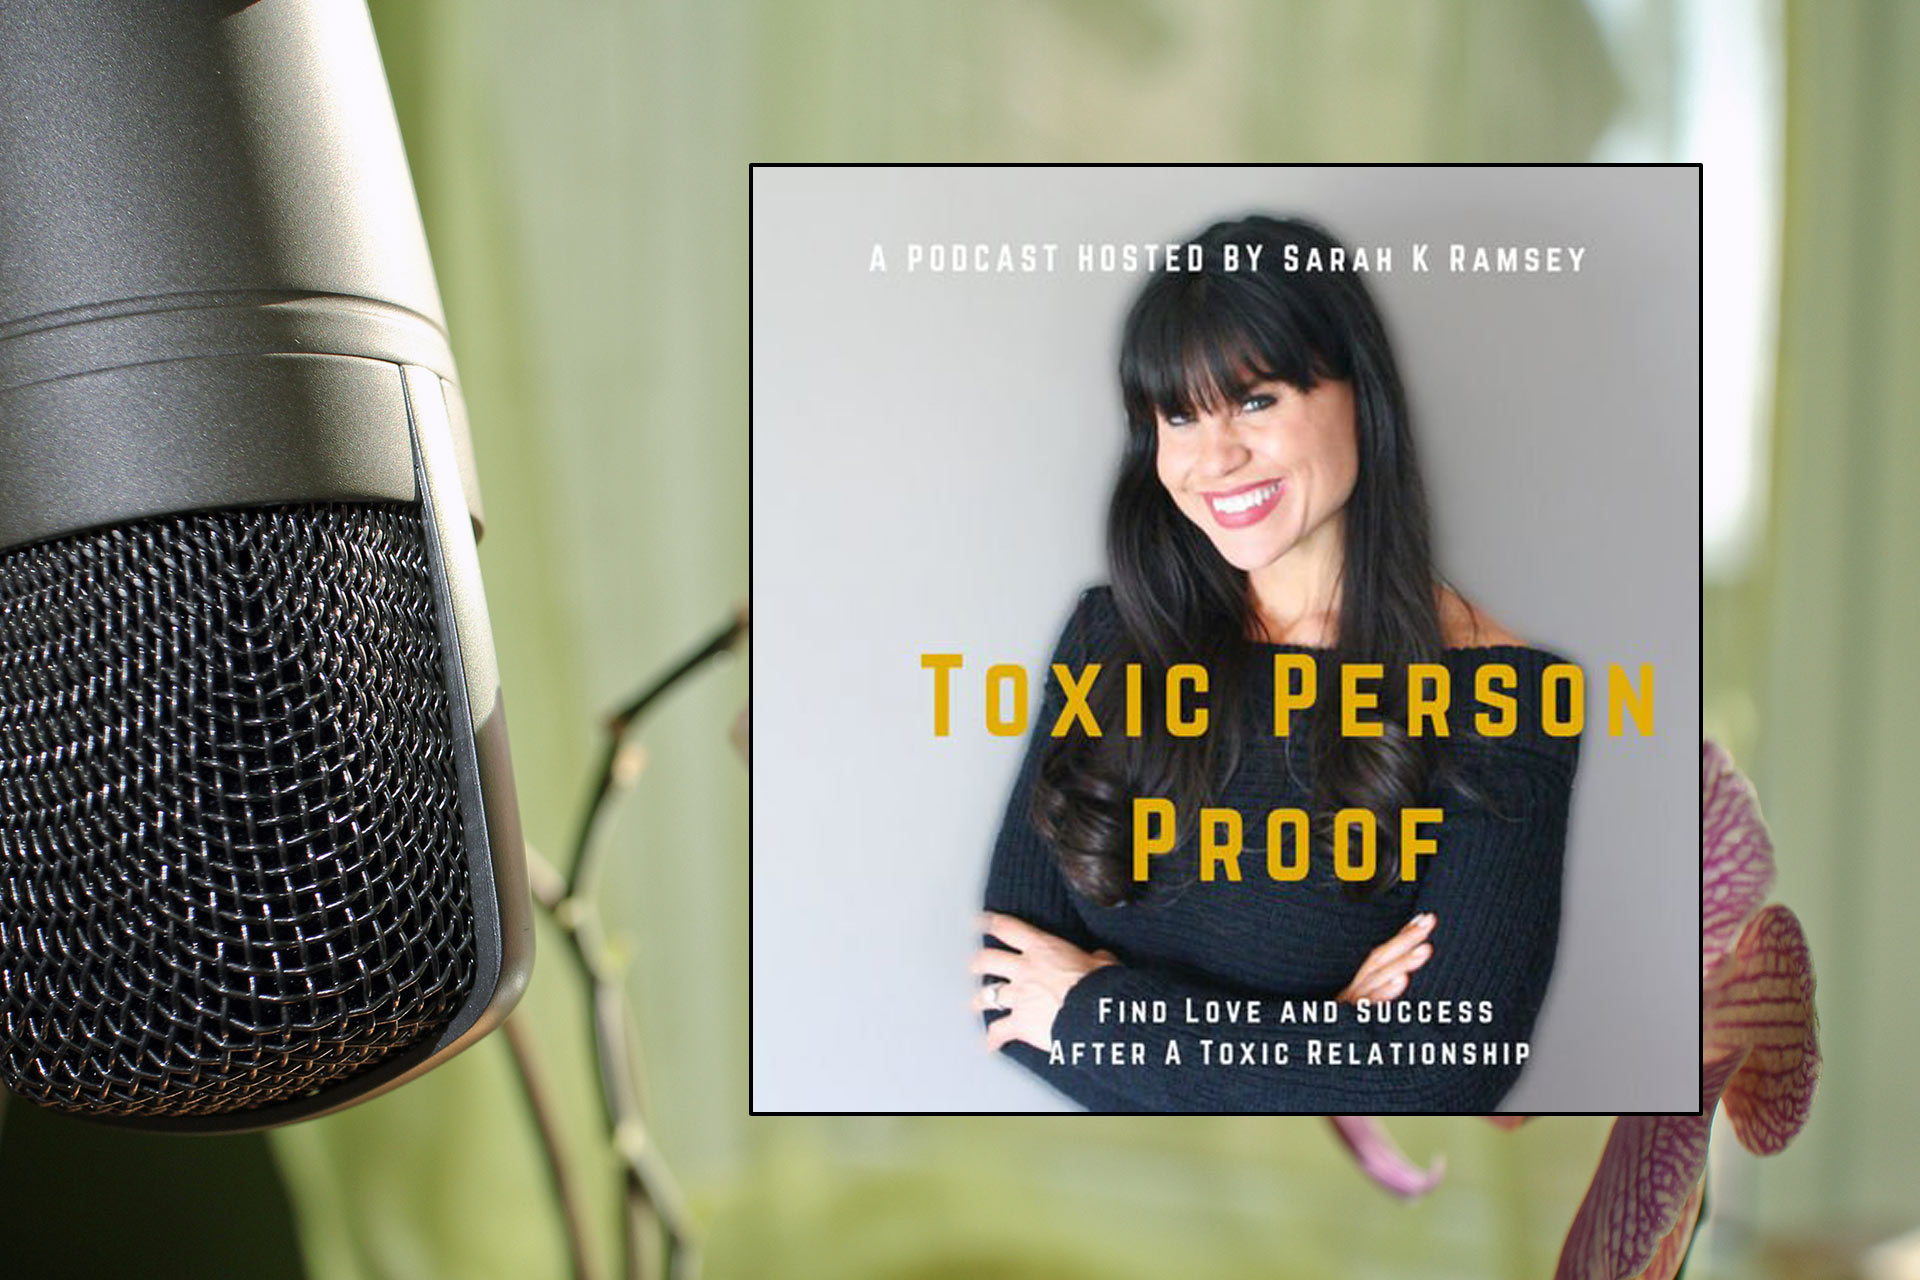 The New Version of Man – Toxic Person Proof podcast with Sarah K. Ramsey